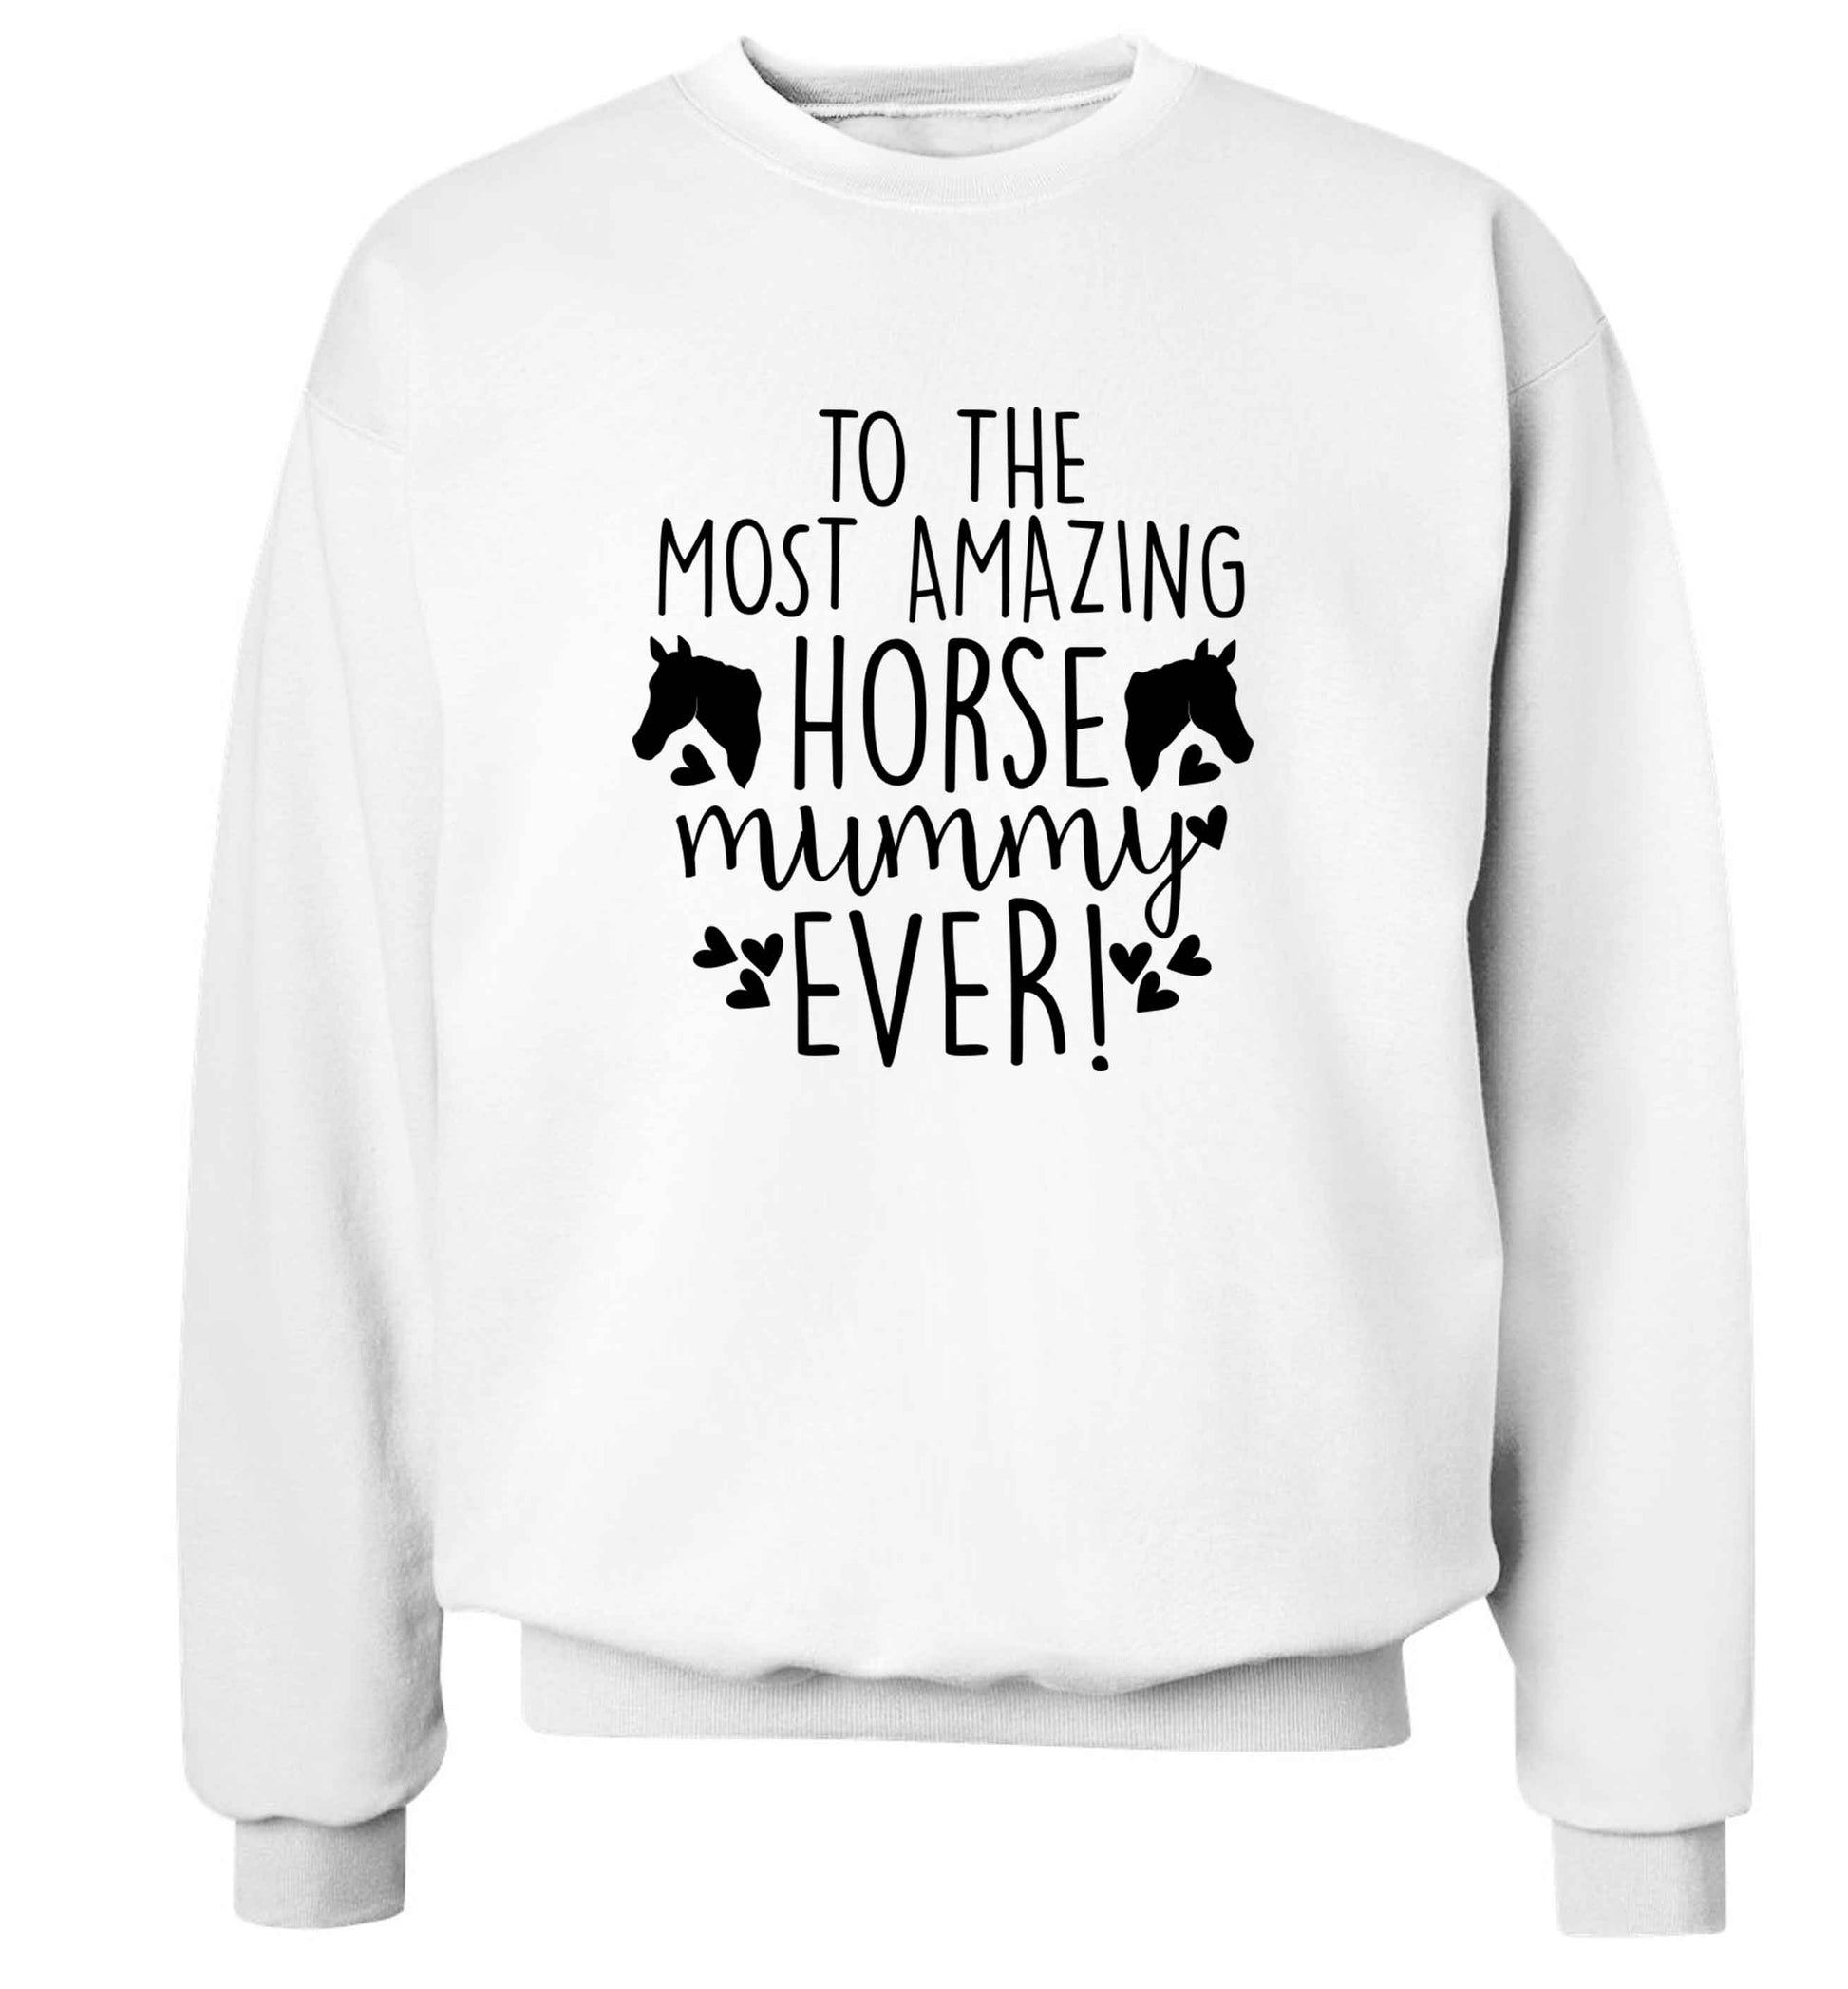 To the most amazing horse mummy ever! adult's unisex white sweater 2XL